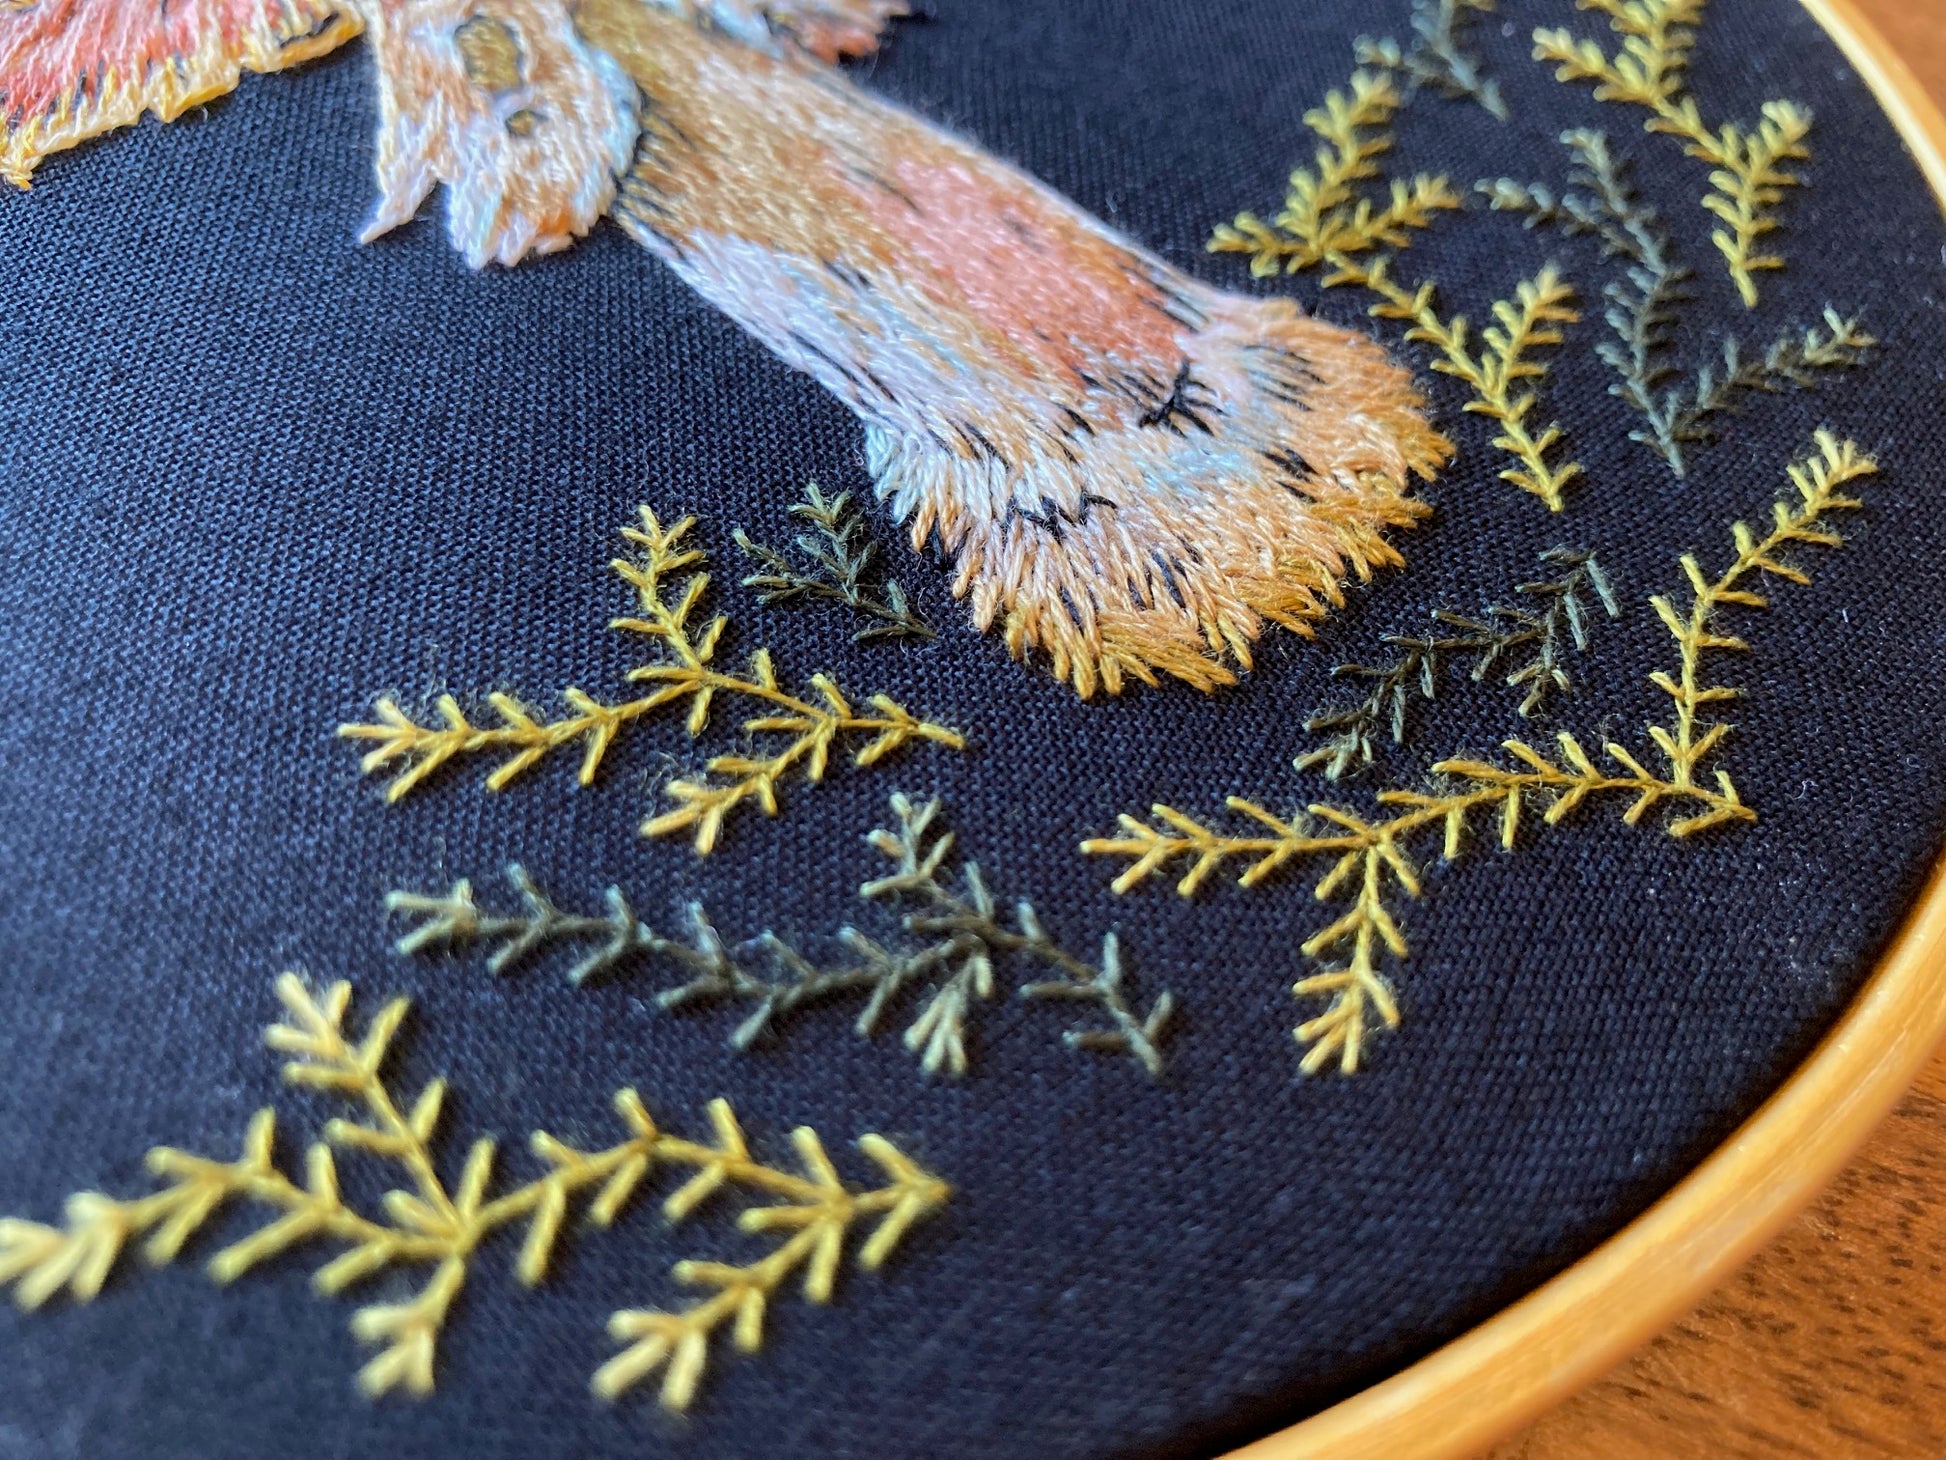 A closeup of an embroidered mushroom in which you can see only the stem among green embroidered moss on a black fabric in a round gold hoop